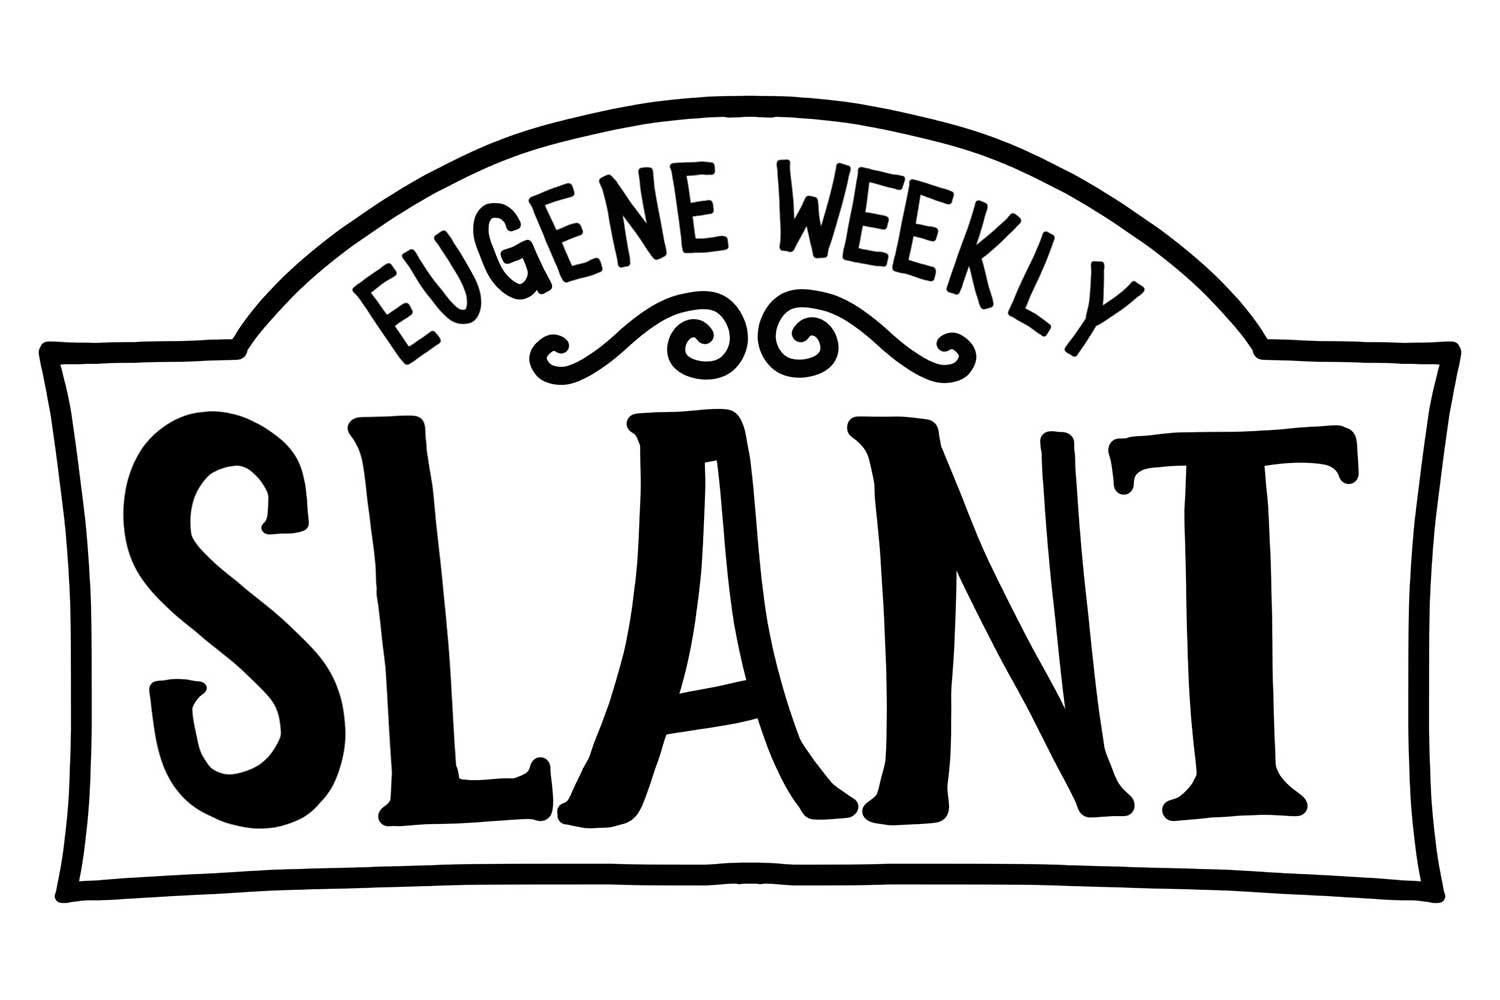 Ahead of the Game – Eugene Weekly